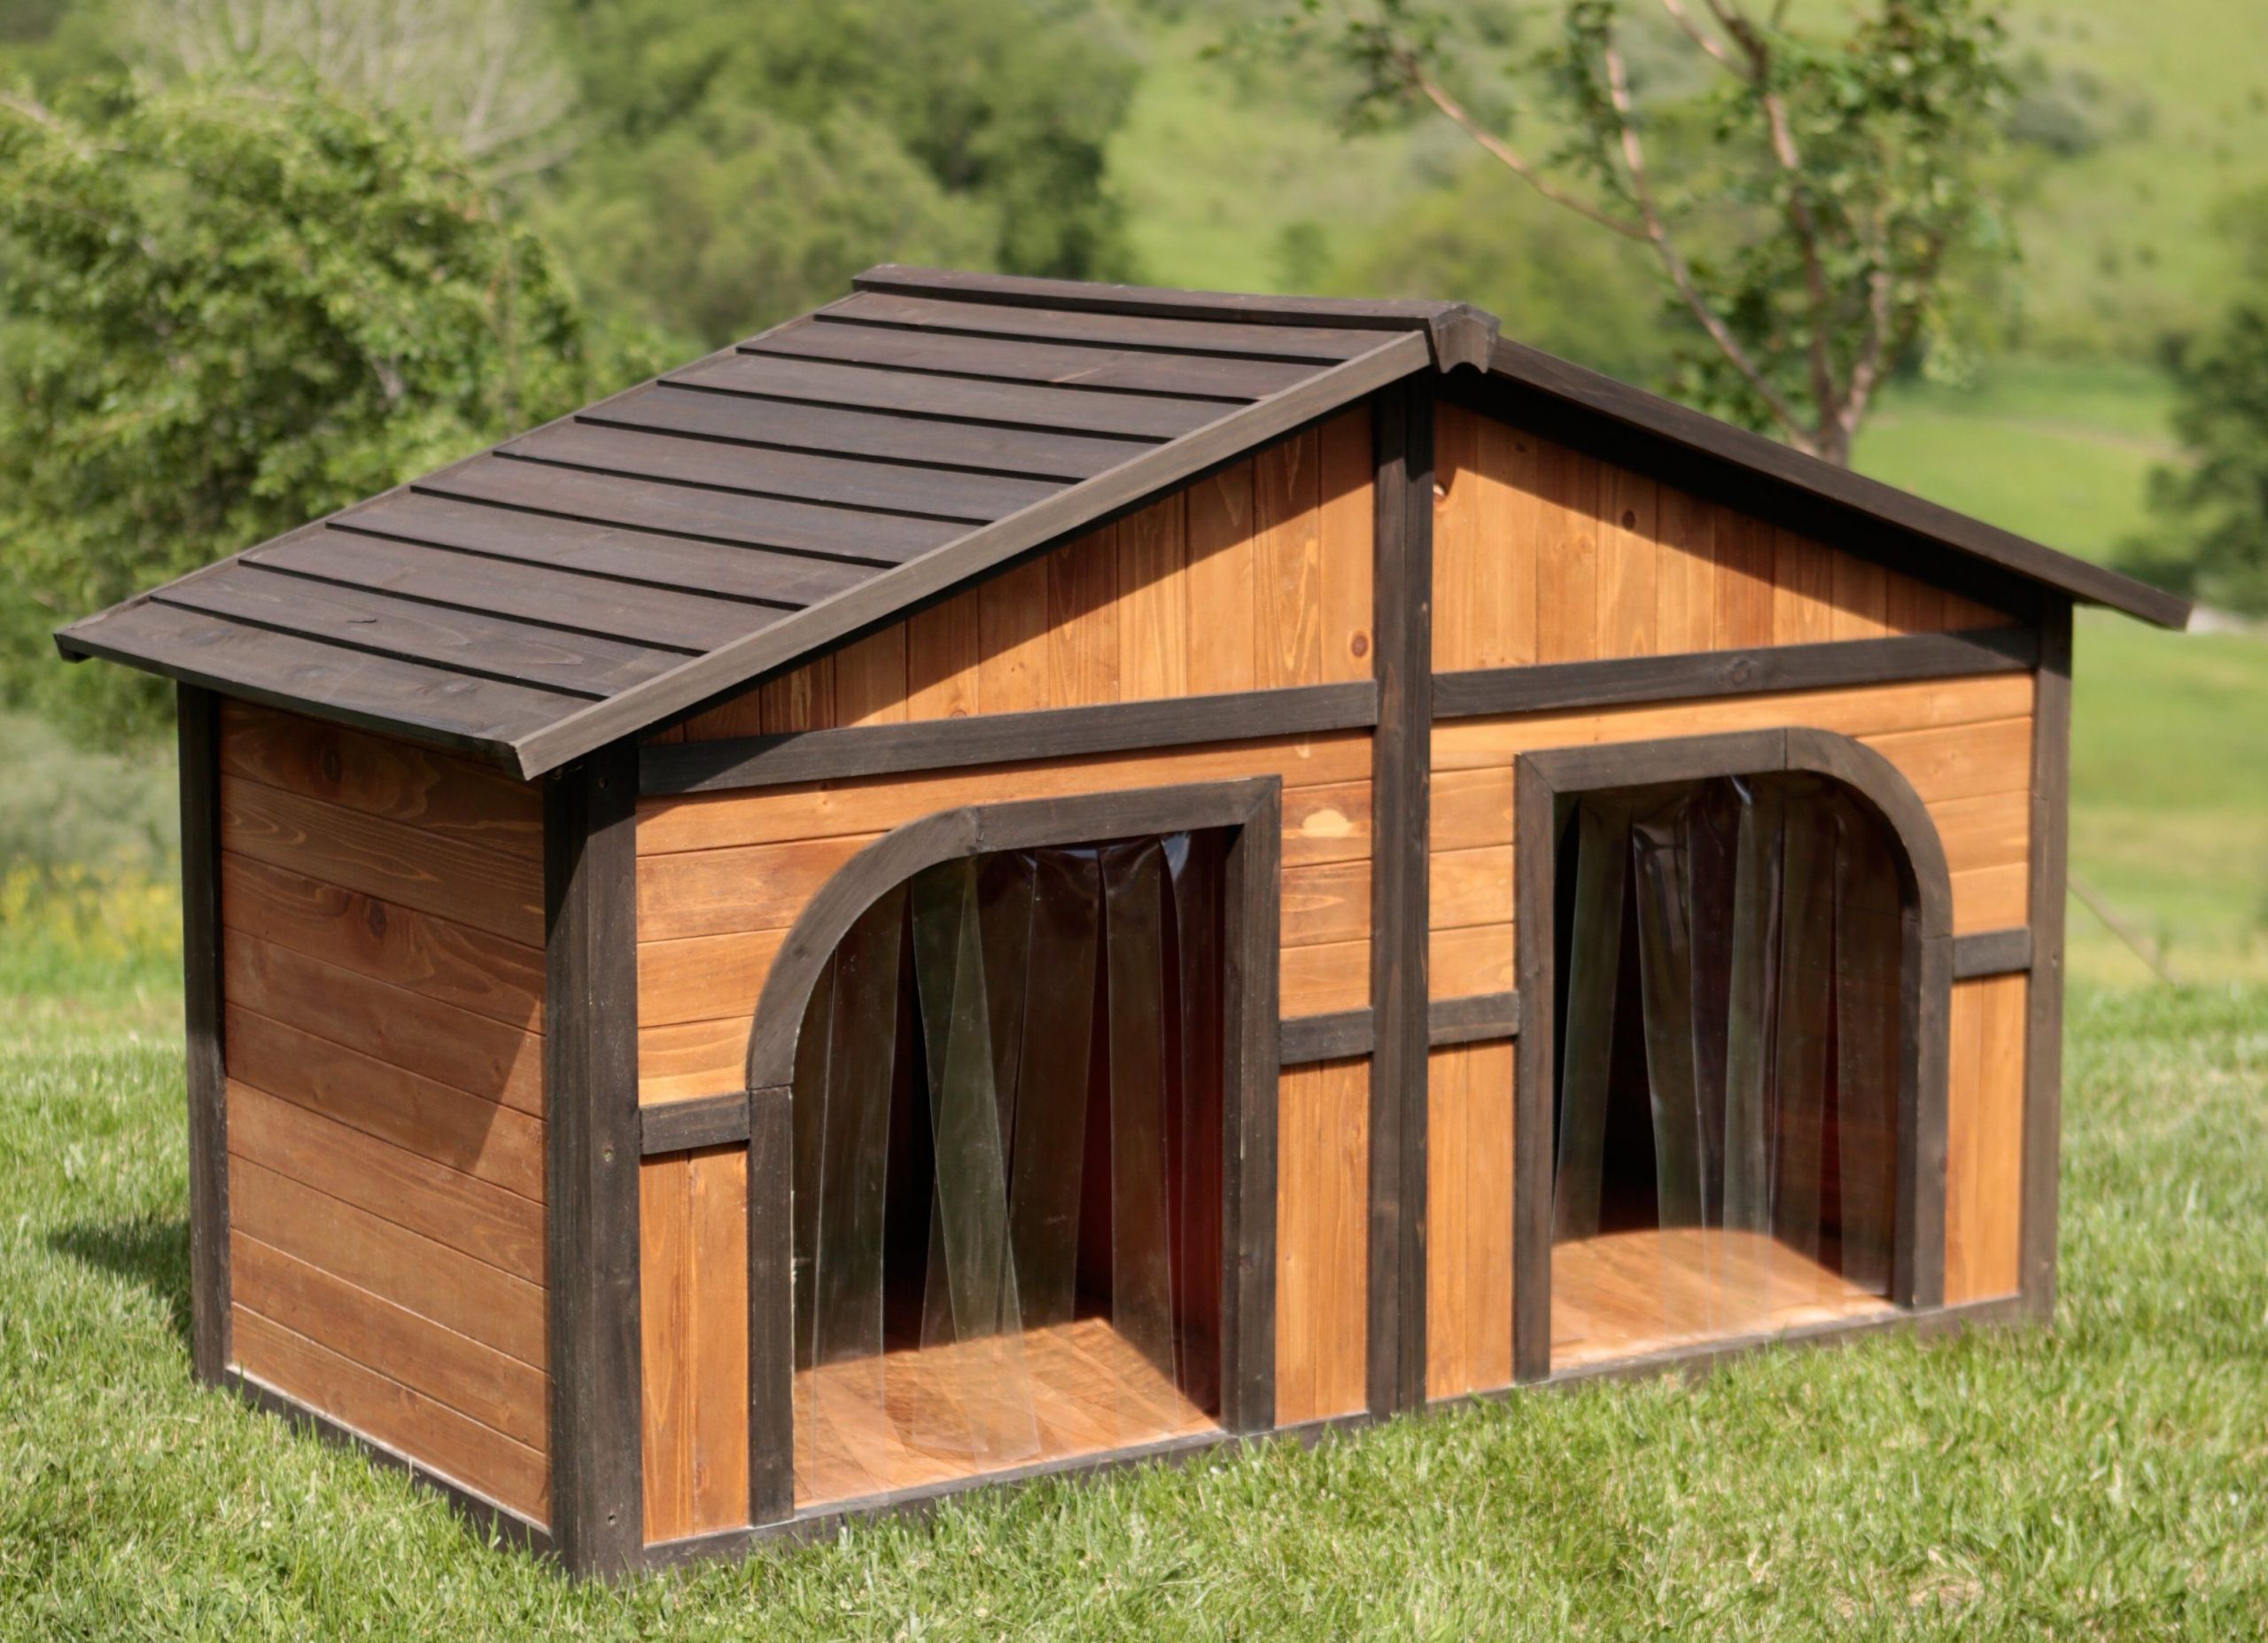 DIY Dog Kennels Plans
 10 Simple But Beautiful DIY Dog House Designs That You Can